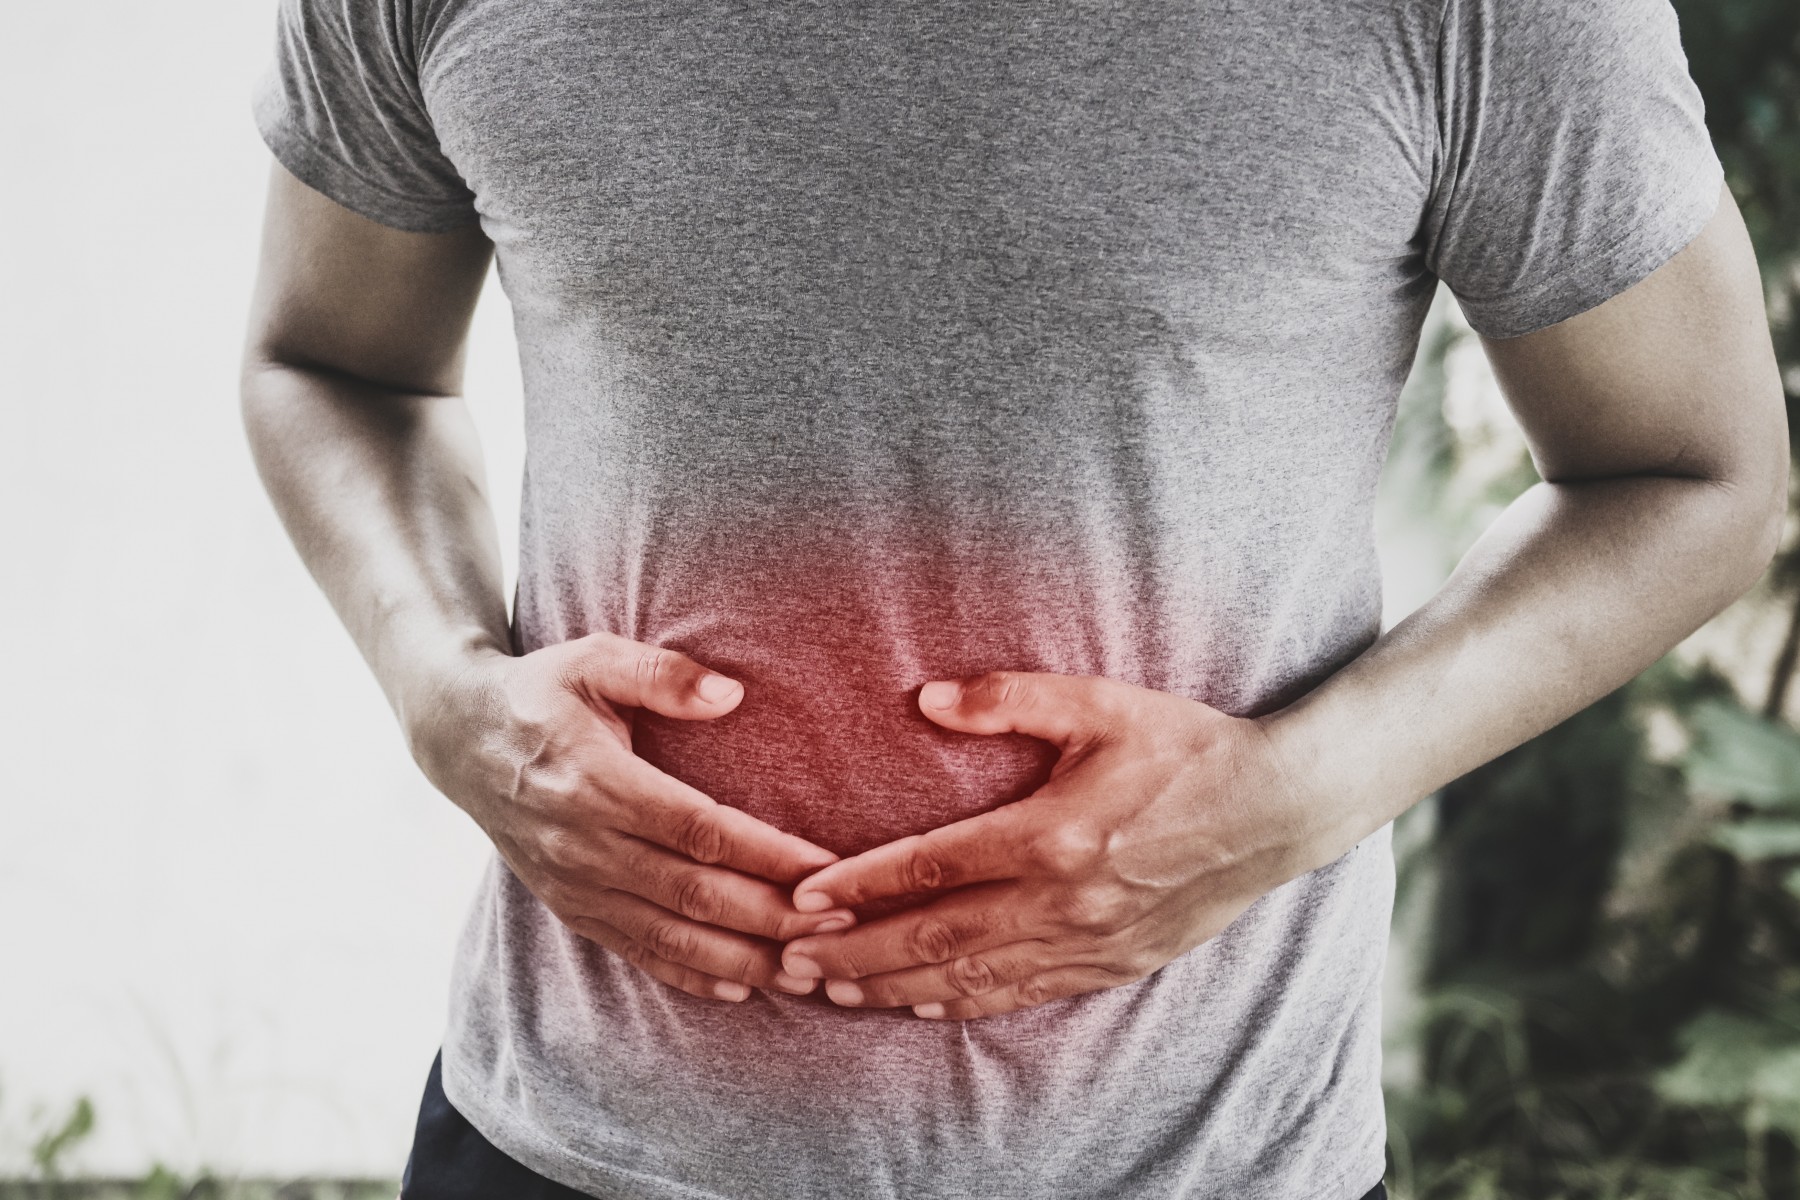 10 Stomach Symptoms You Should Never Ignore